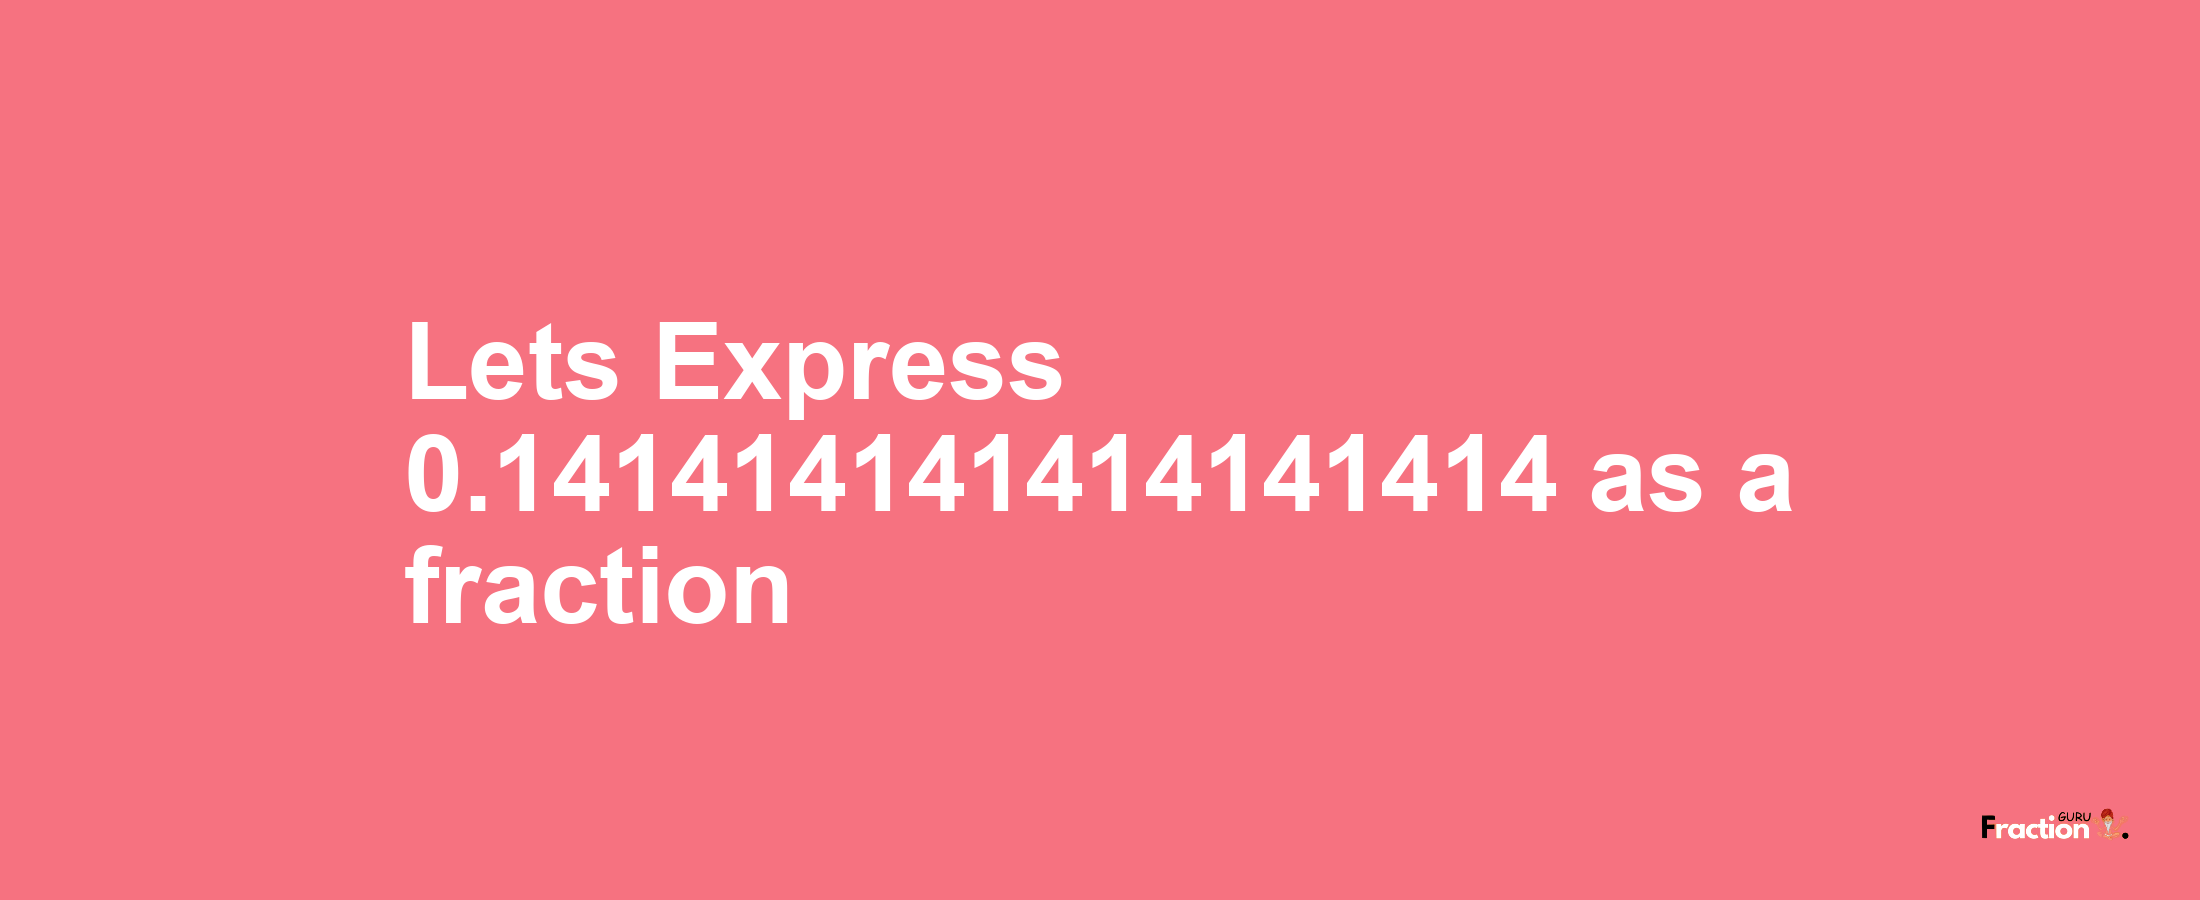 Lets Express 0.141414141414141414 as afraction